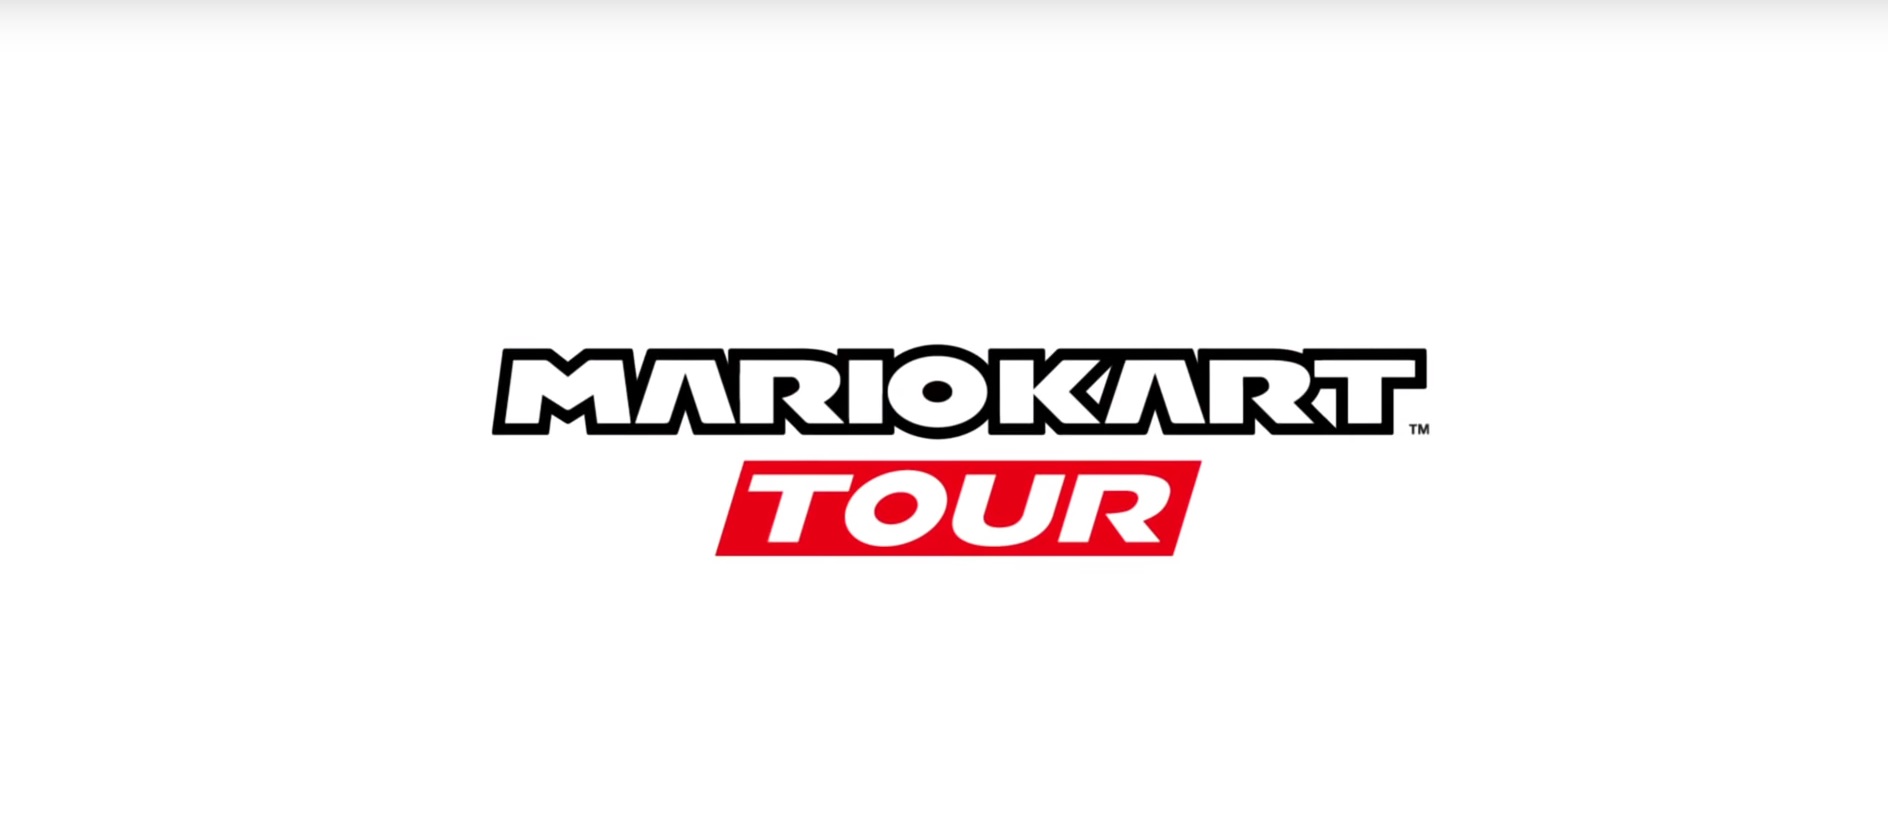 Mario Kart Tour is Coming Next Week – Here’s Everything You Need to Know